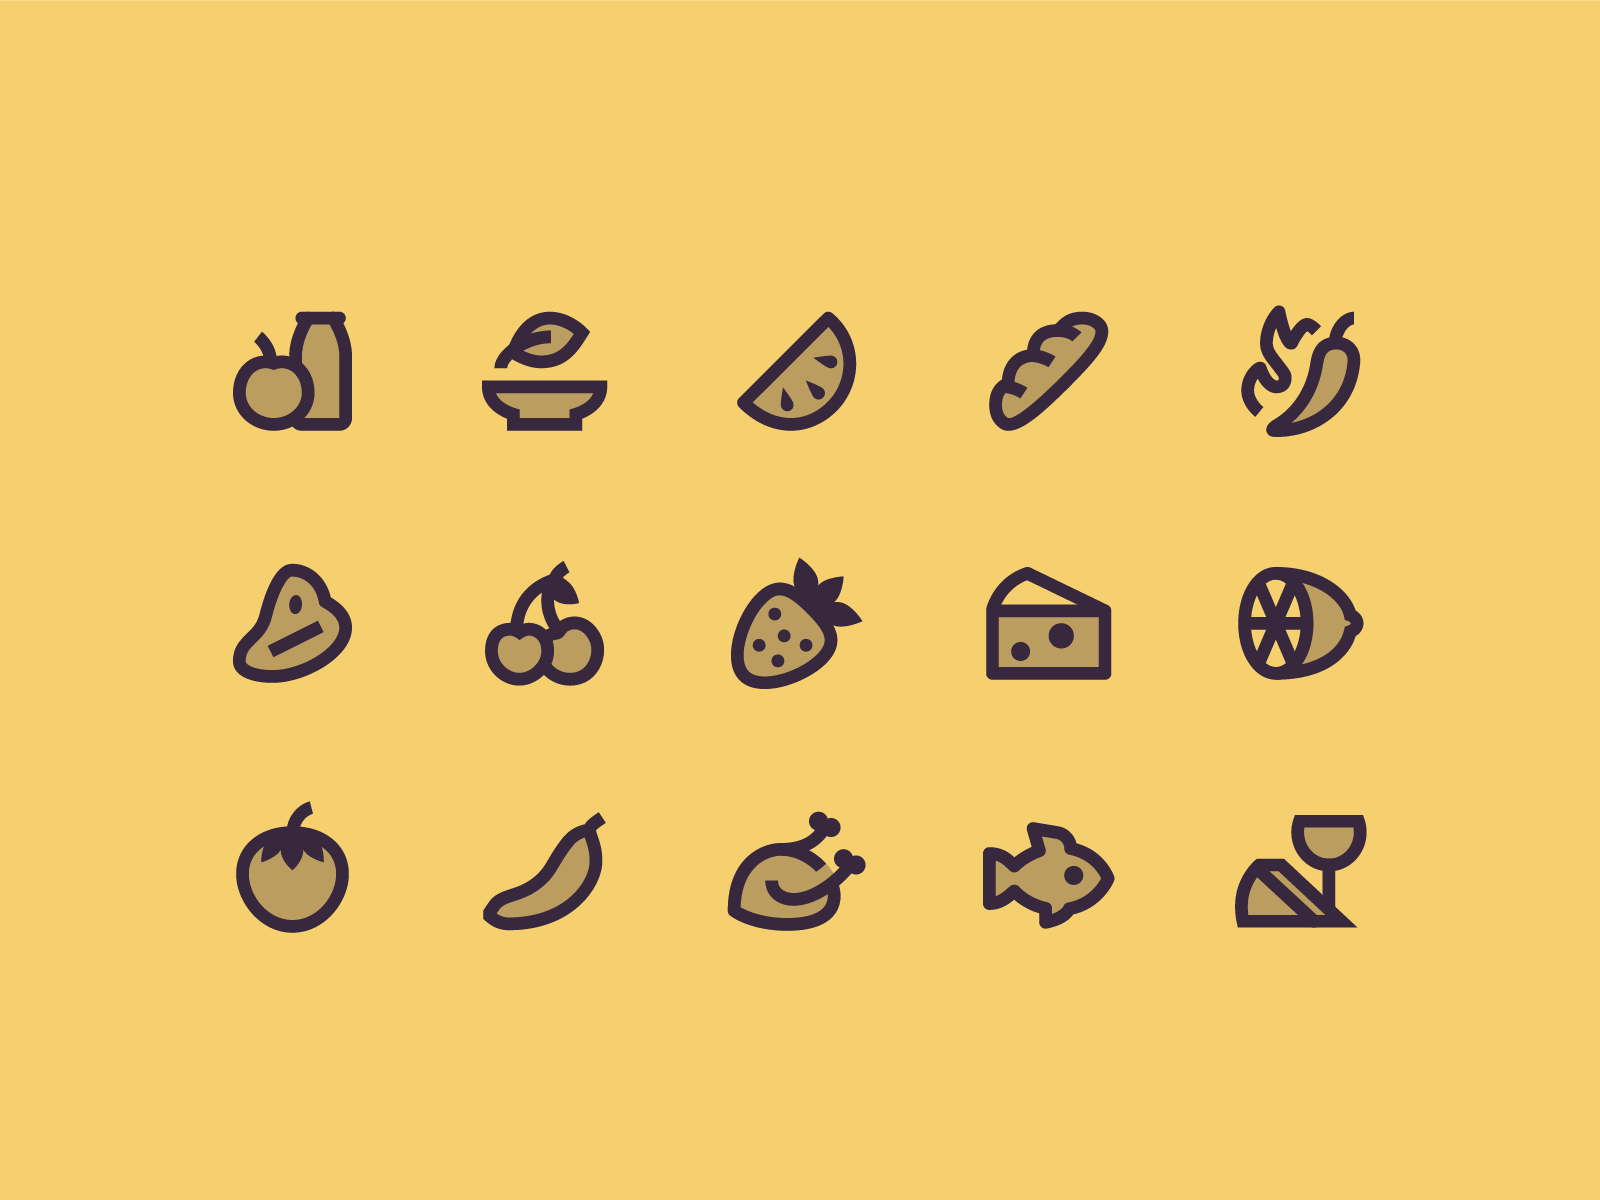 two-tone material icons